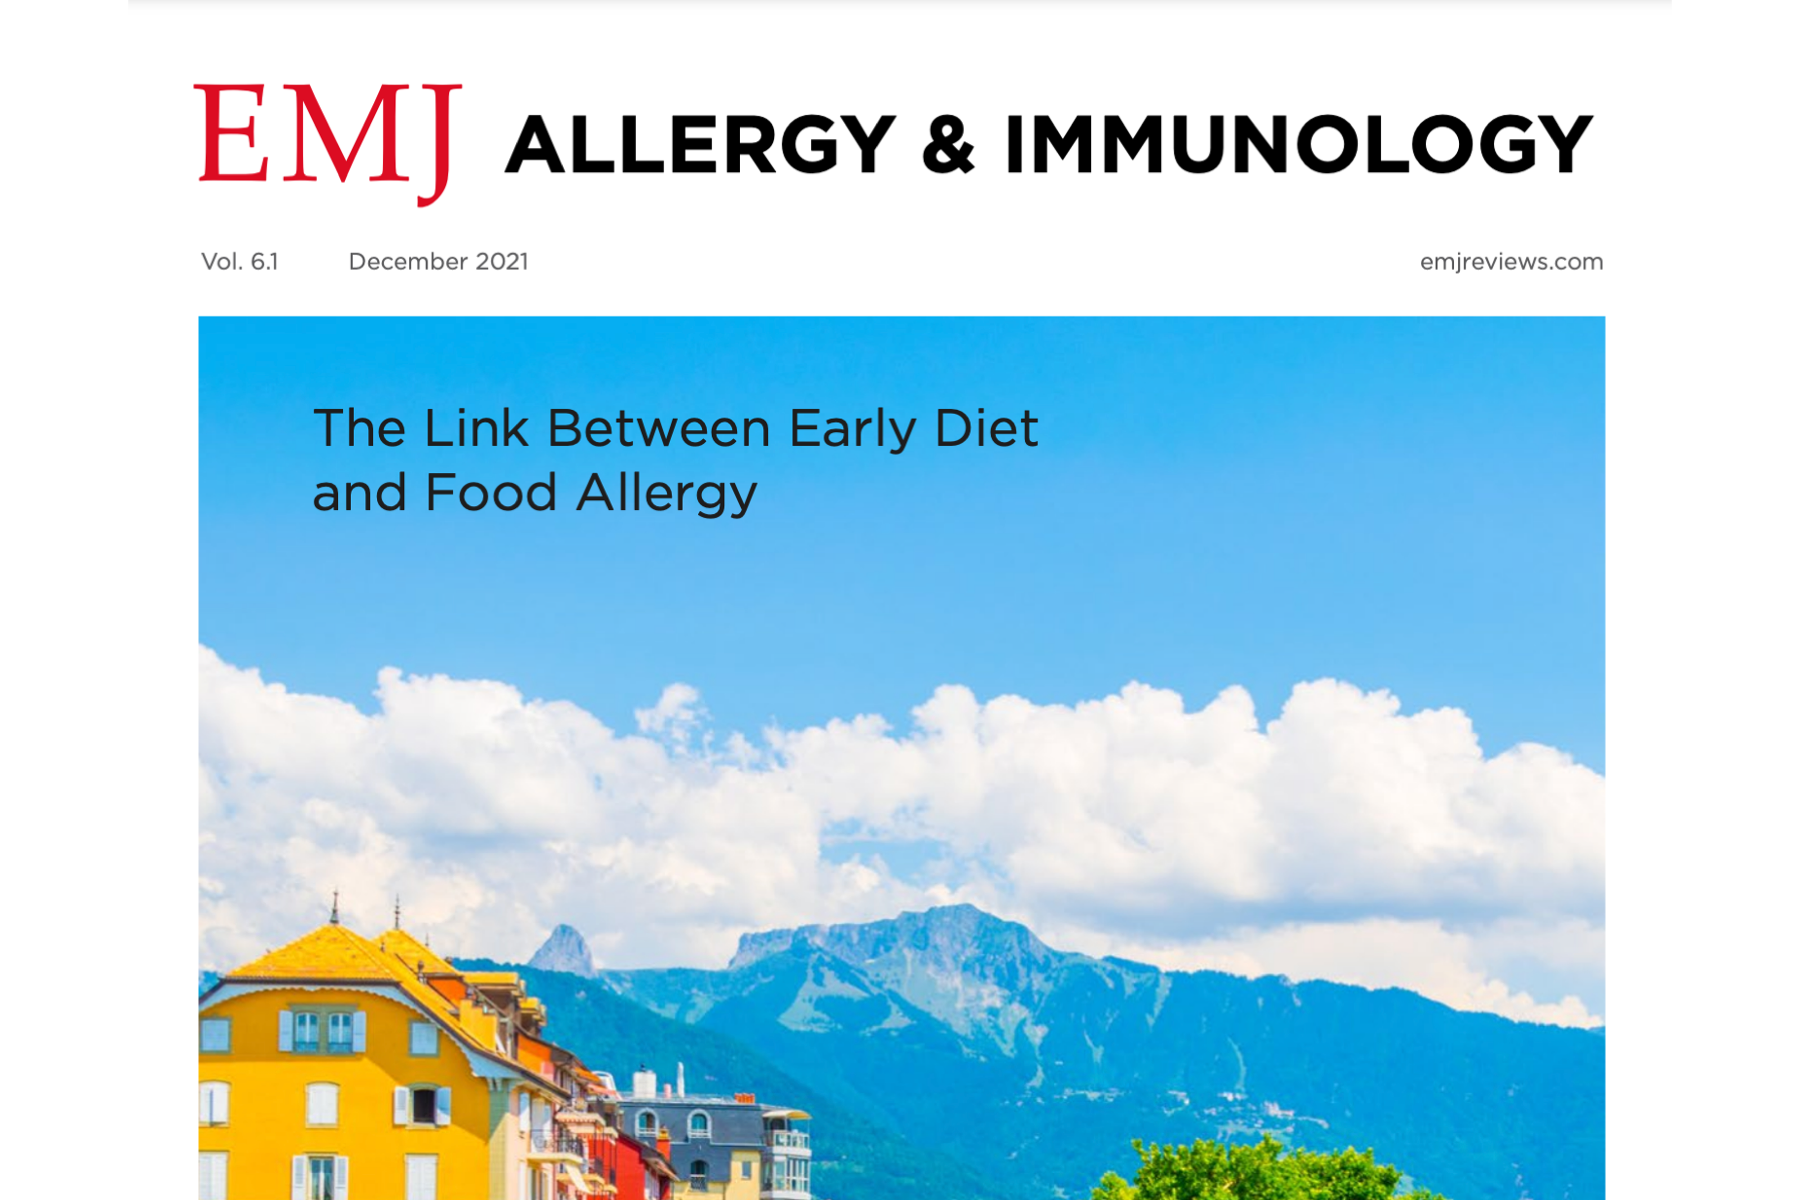 The Link Between Early Diet and Food Allergy